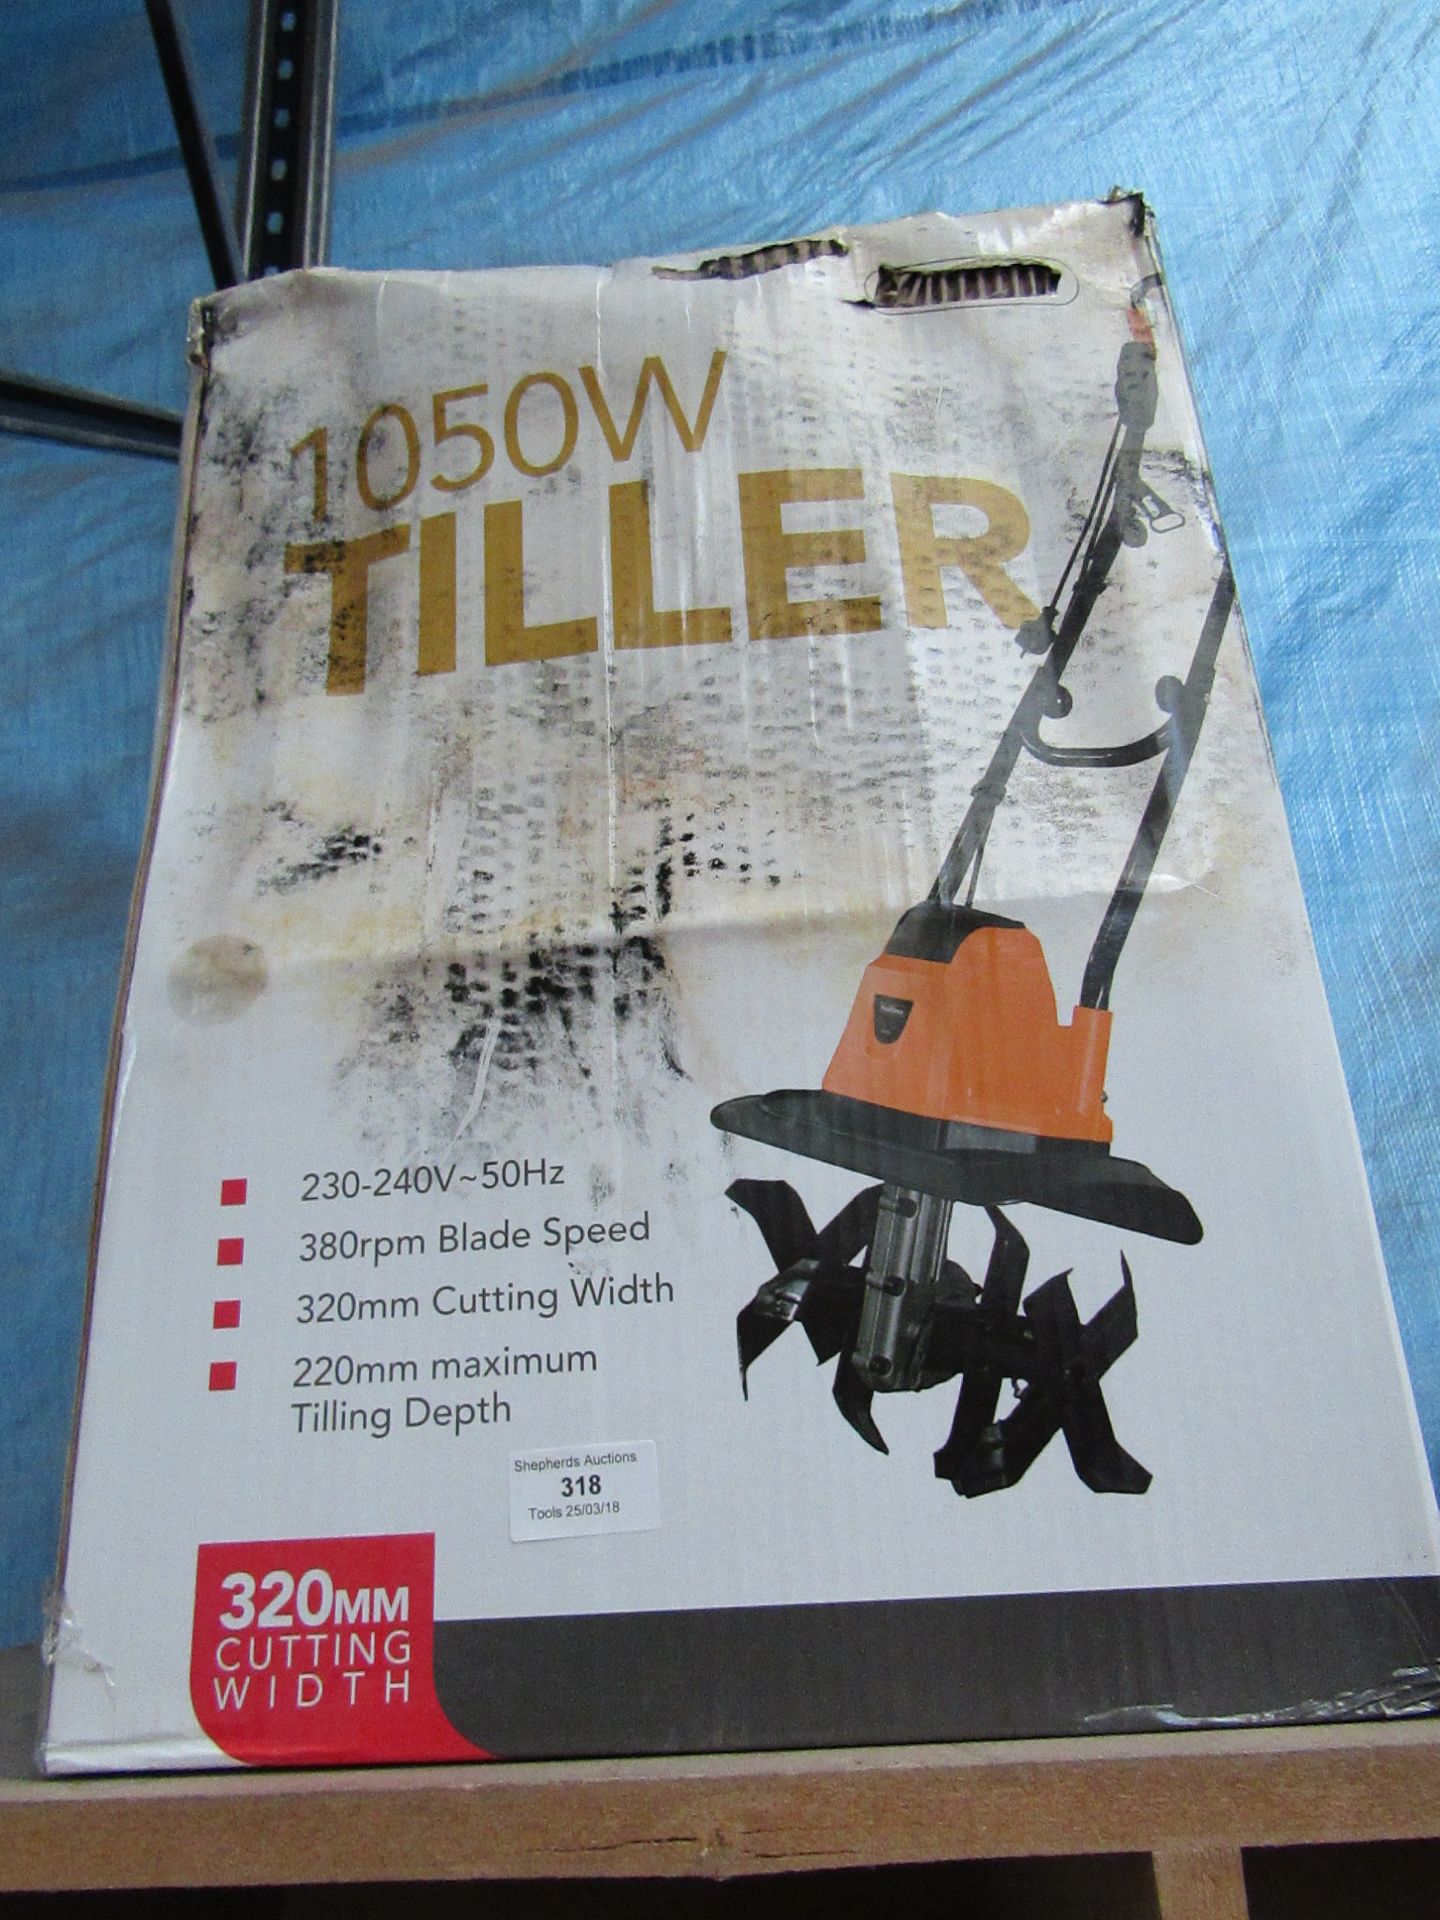 1050w 320mm Tiller tool, tested working and boxed  Please note by Bidding on this item you agree